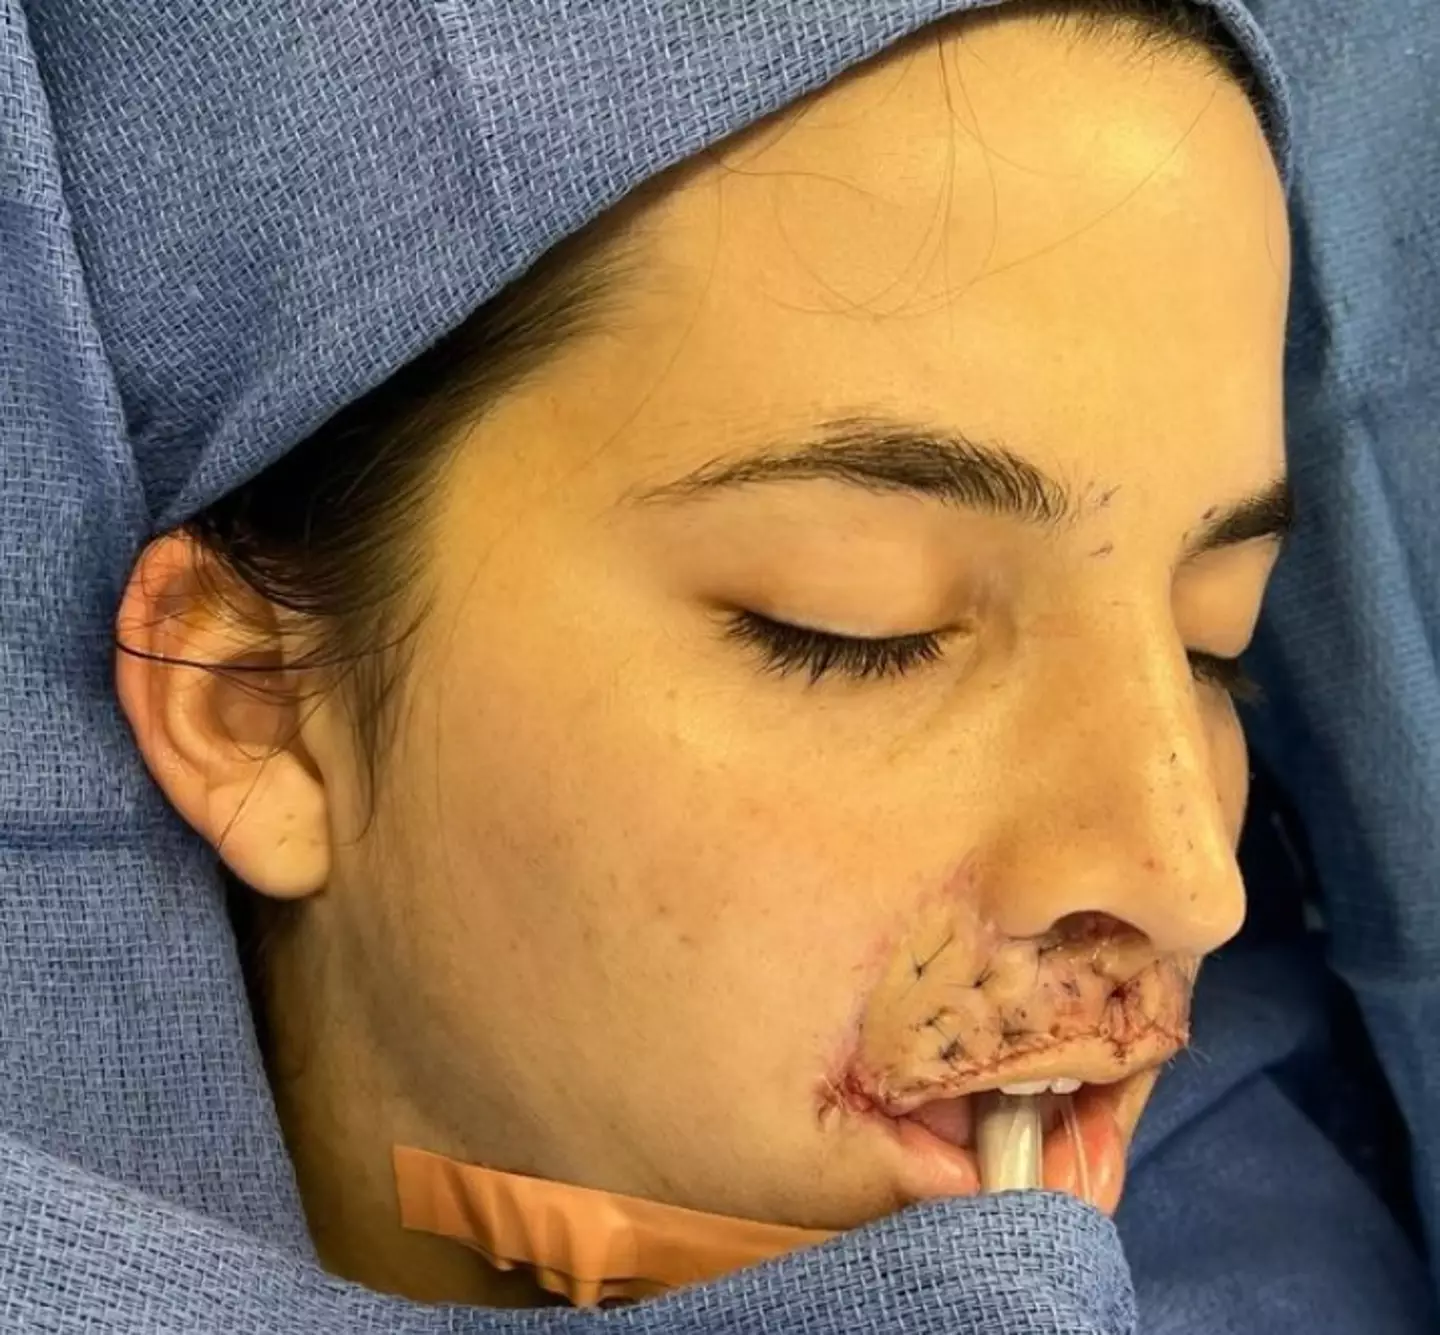 Brooklinn showed the results of her successful surgery.